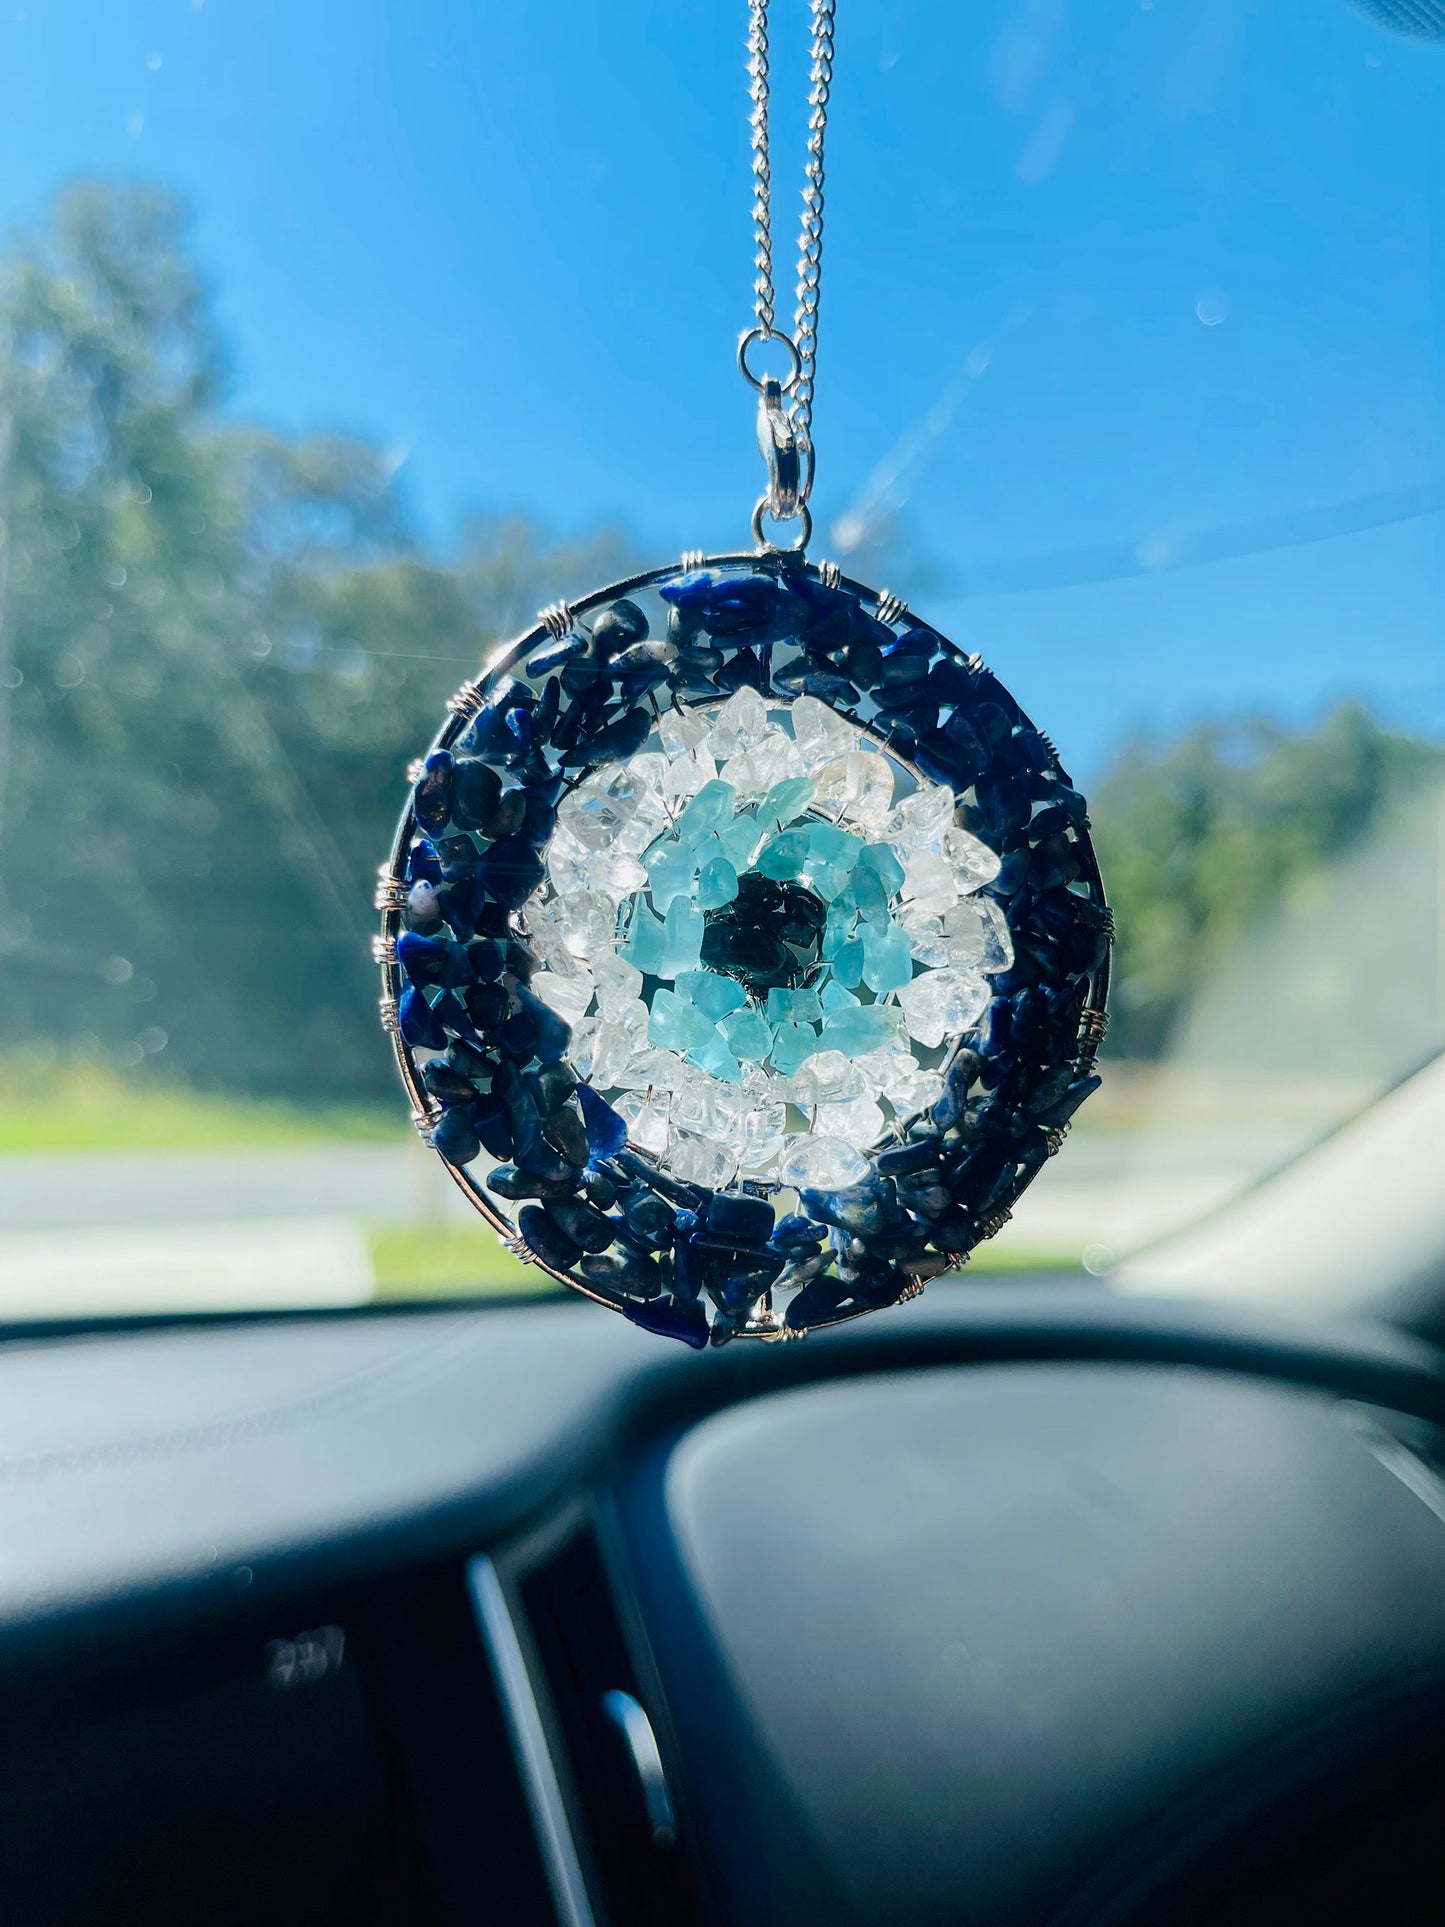 Handmade Evil Eye Nazar Boncuk Pendant with Chain for Rearview Mirror Hanging or Wall Hanging Lapis Lazuli, Crystal, Apatite -- Quick Ship!